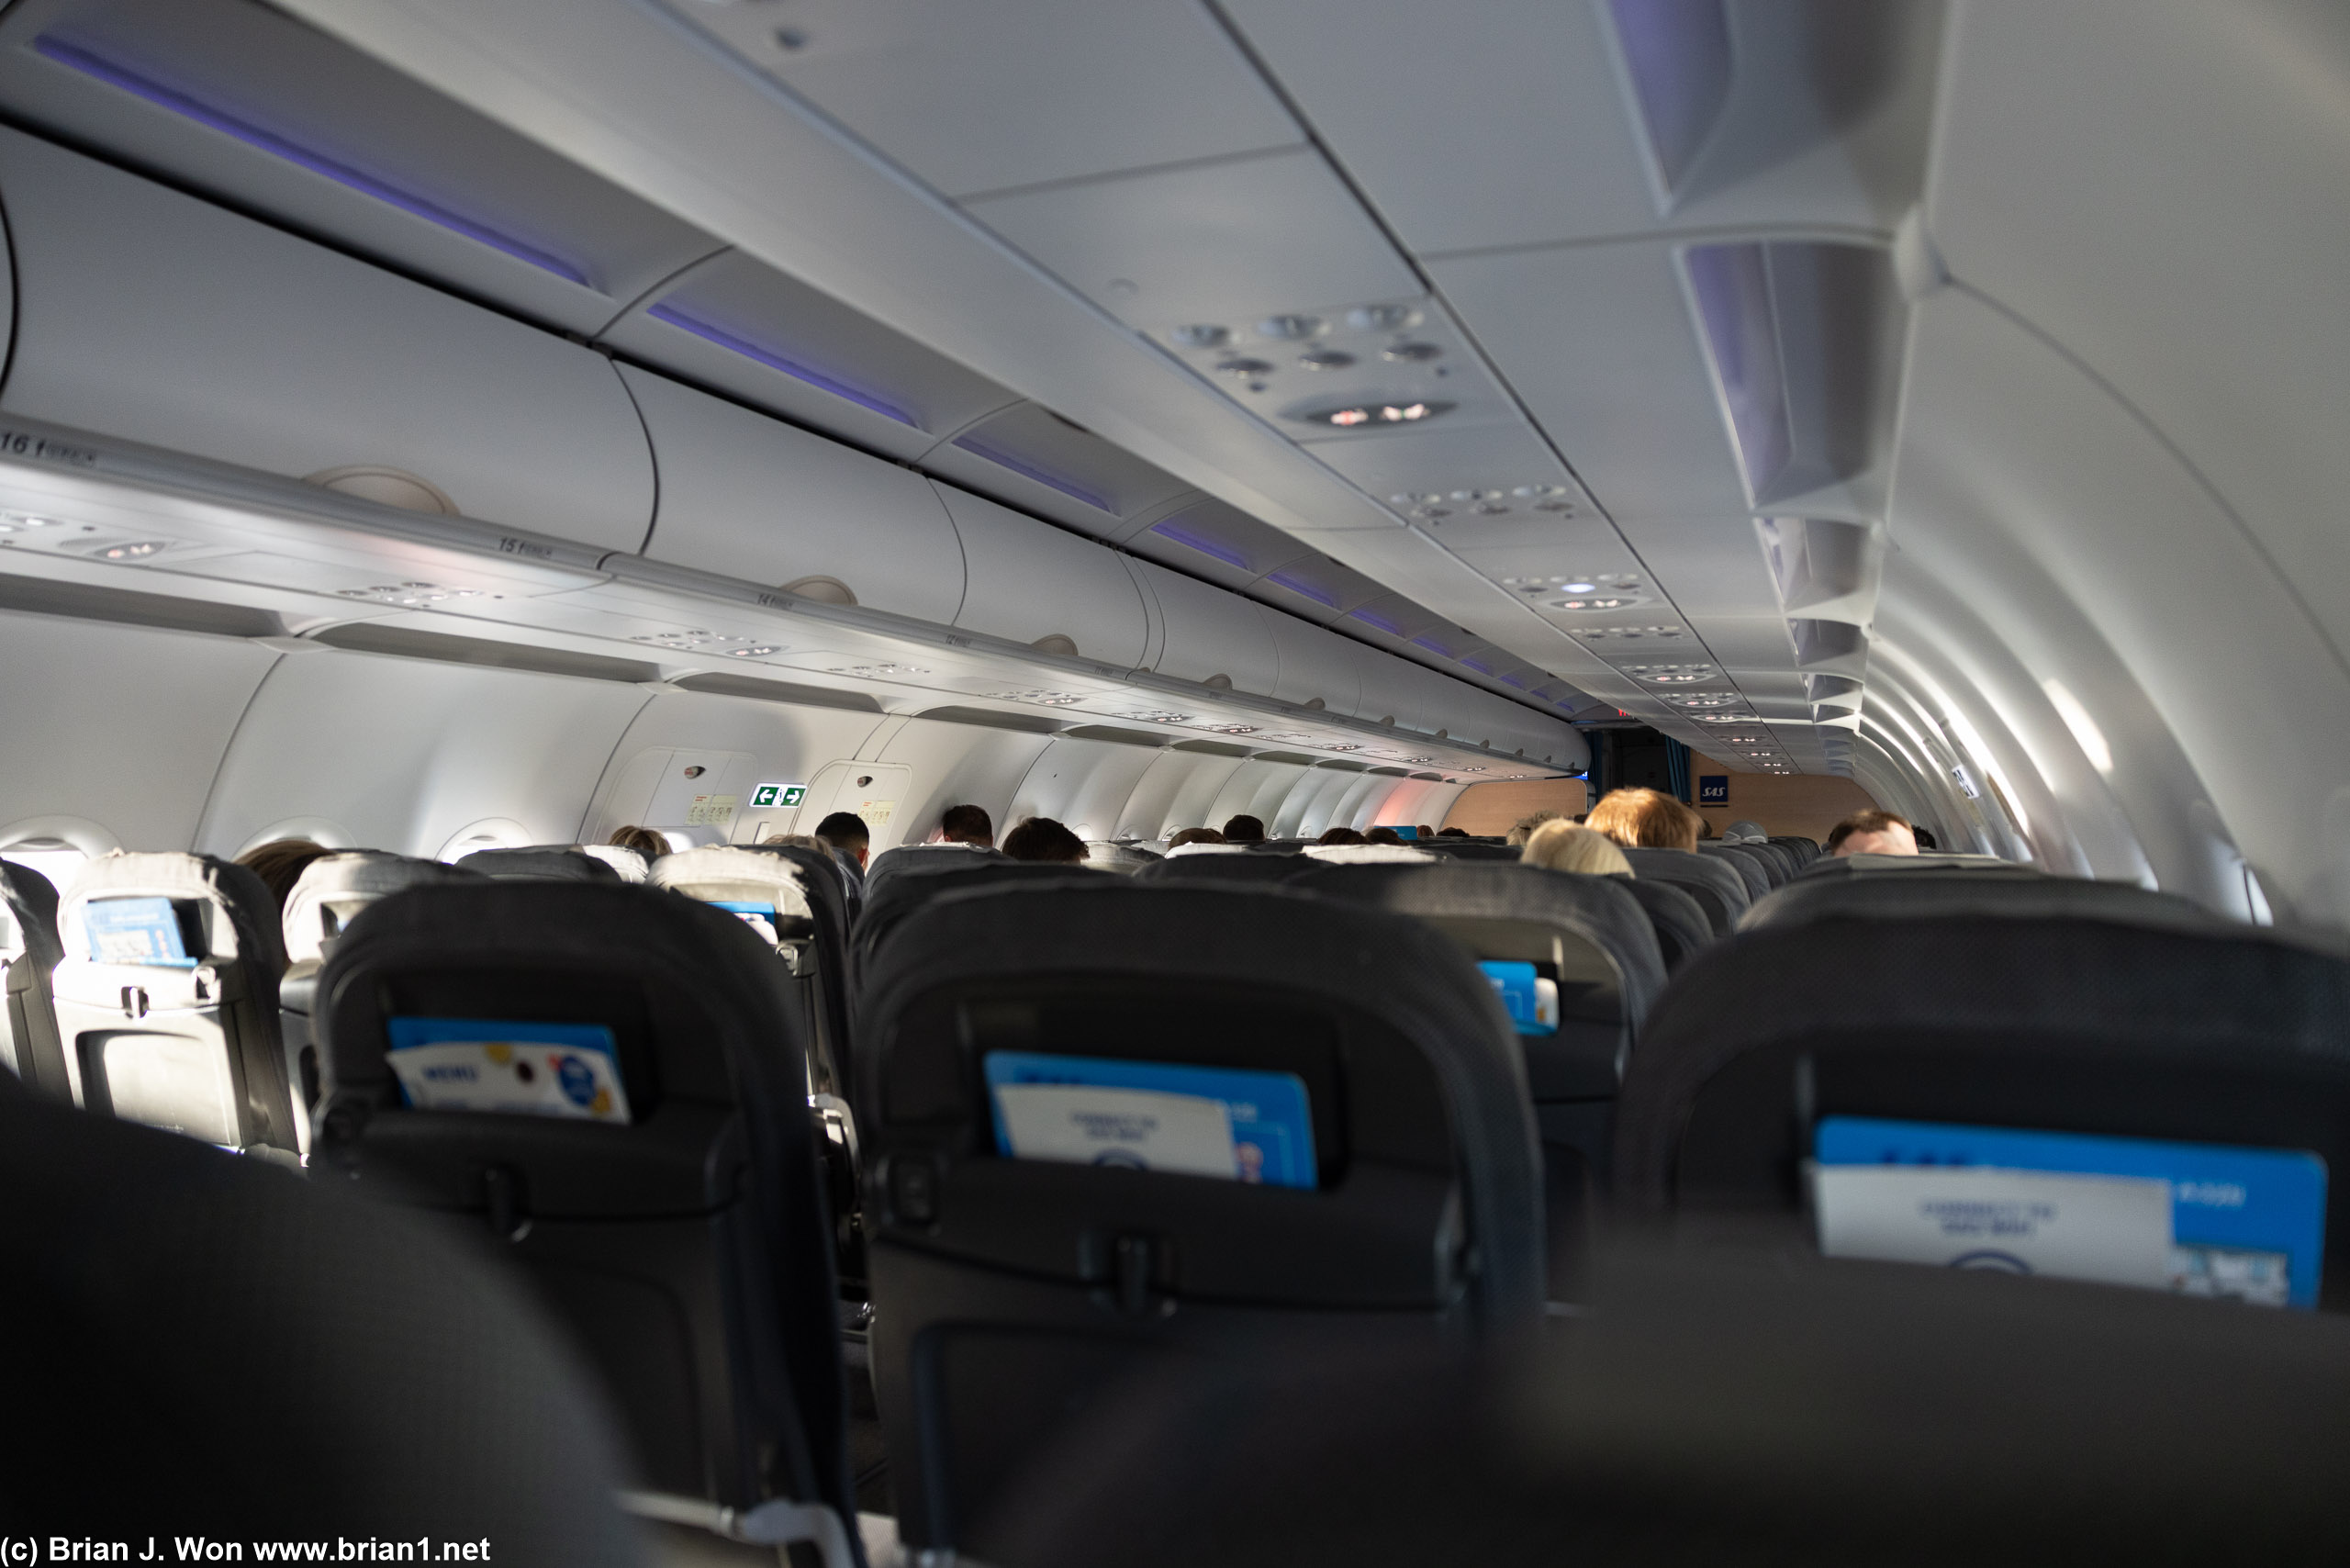 Crammed inside a SAS Airbus A320neo.